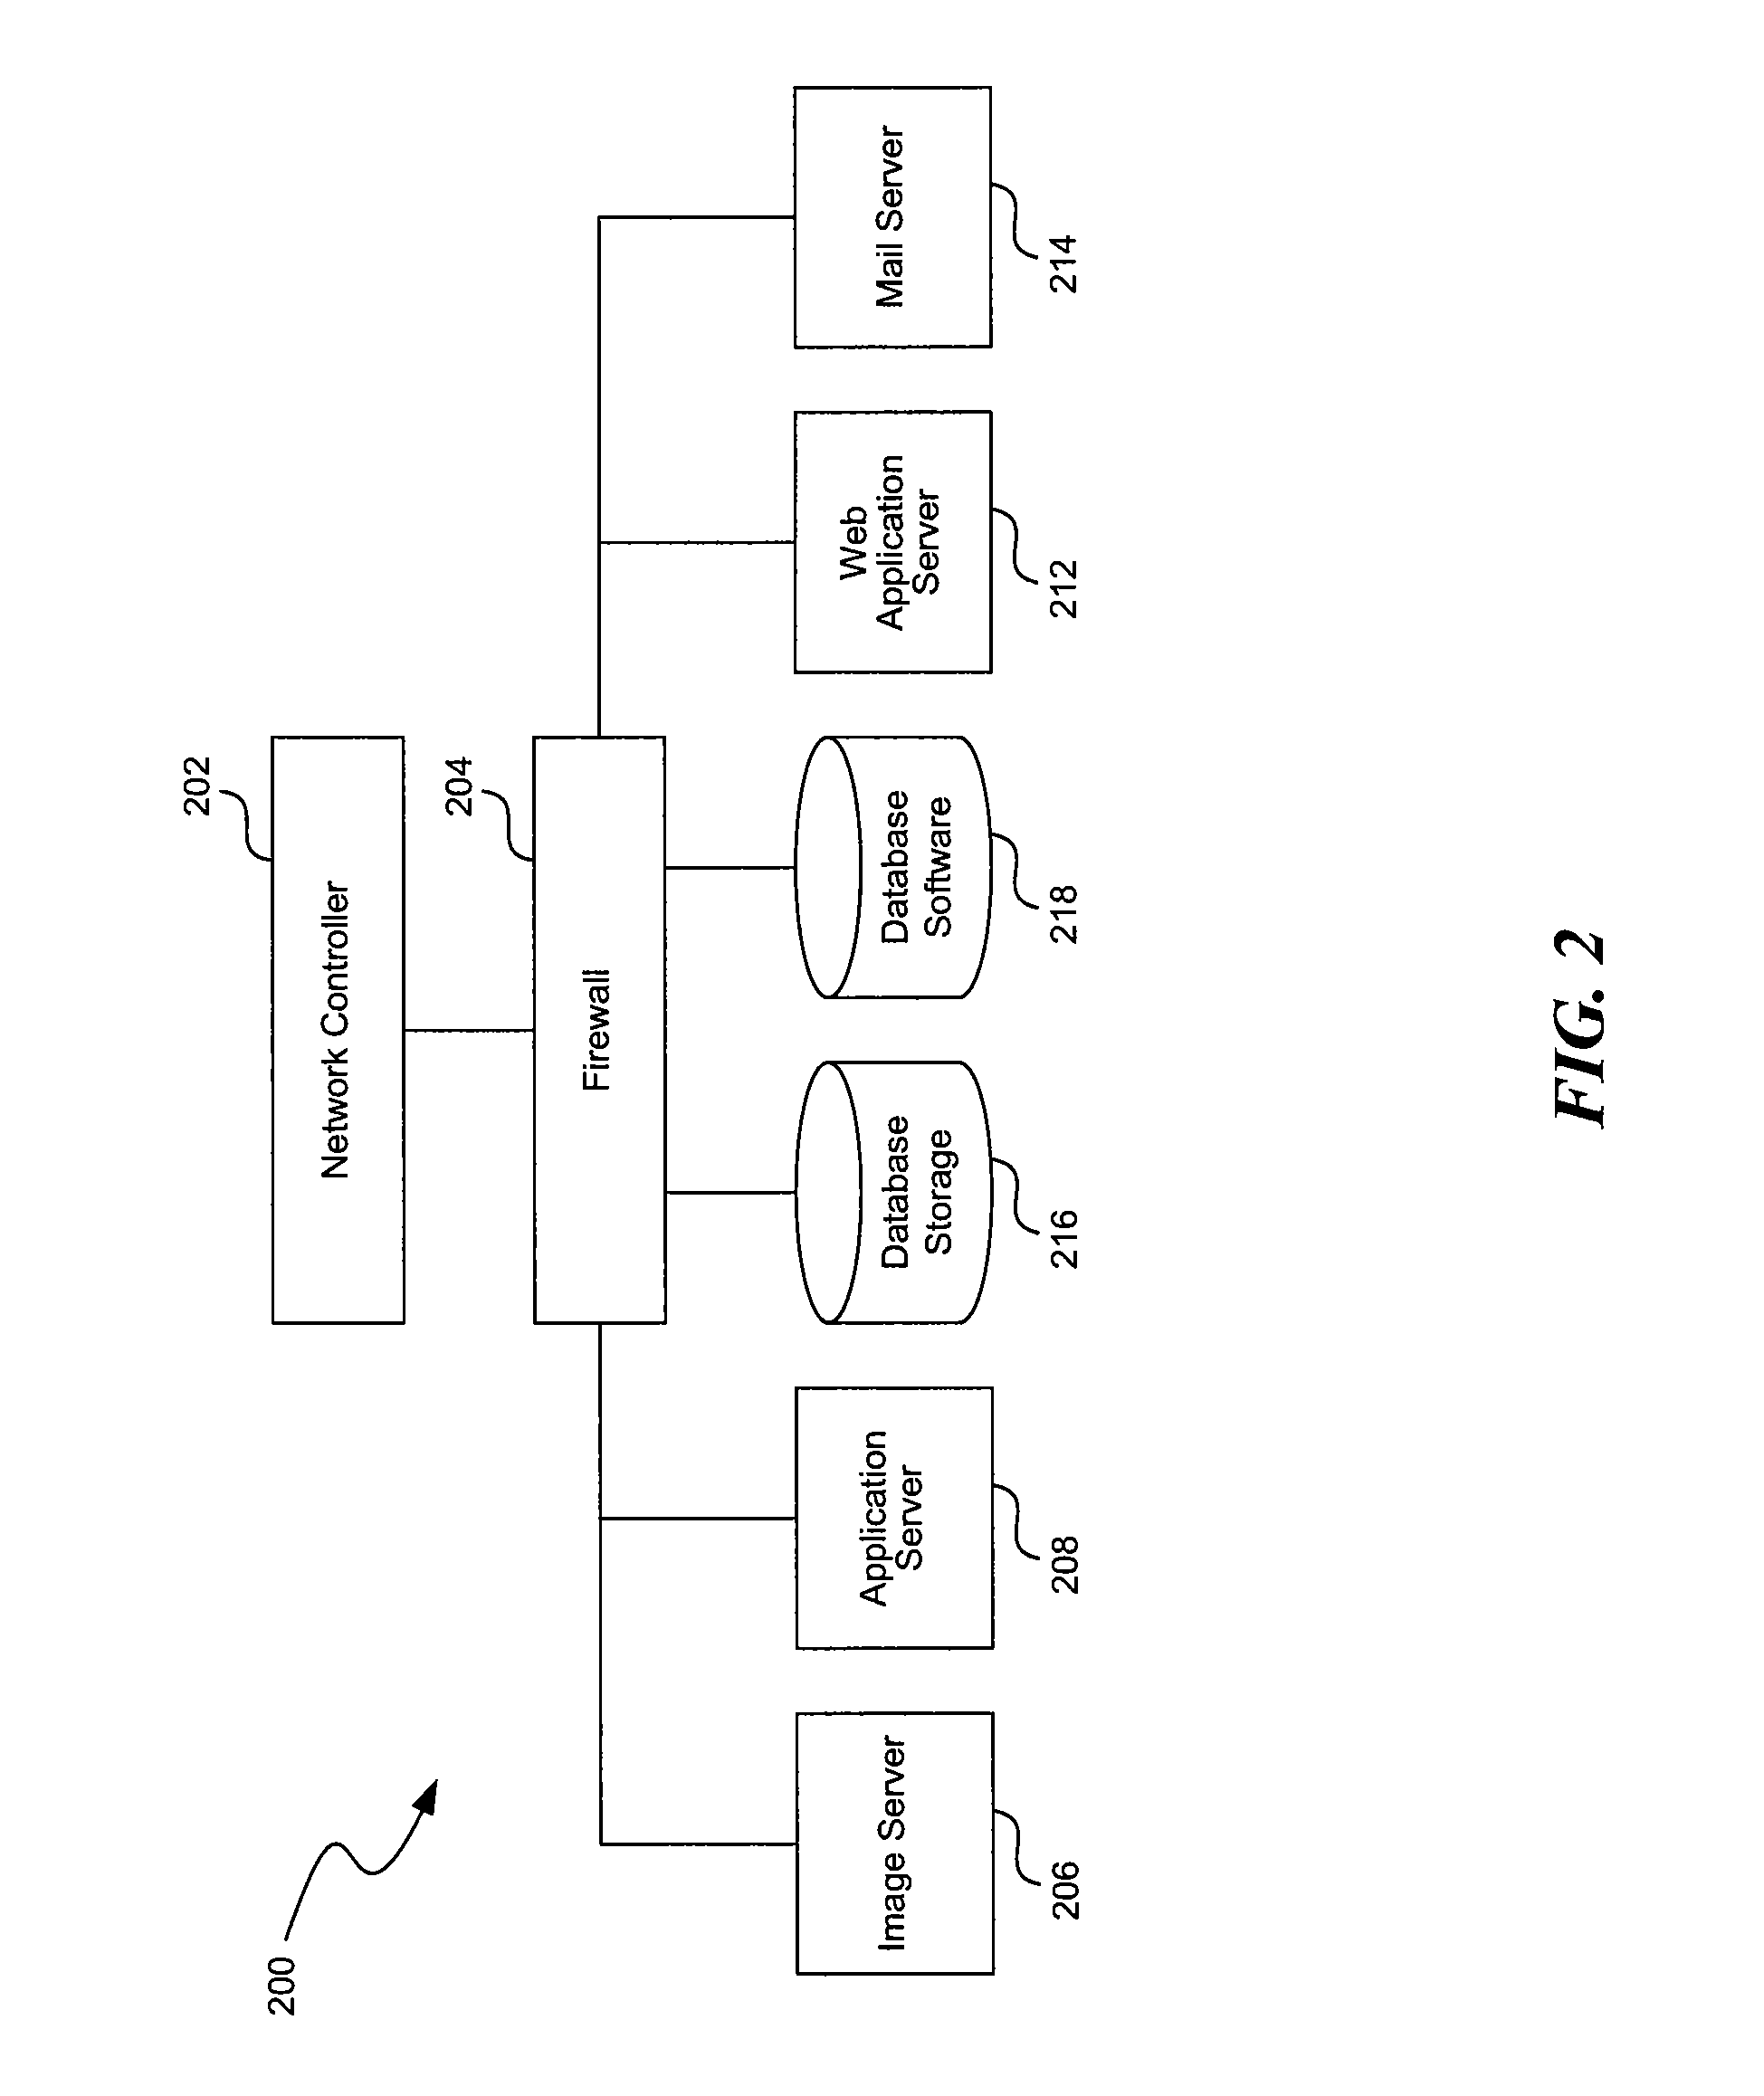 System and Method of a Knowledge Management and Networking Environment